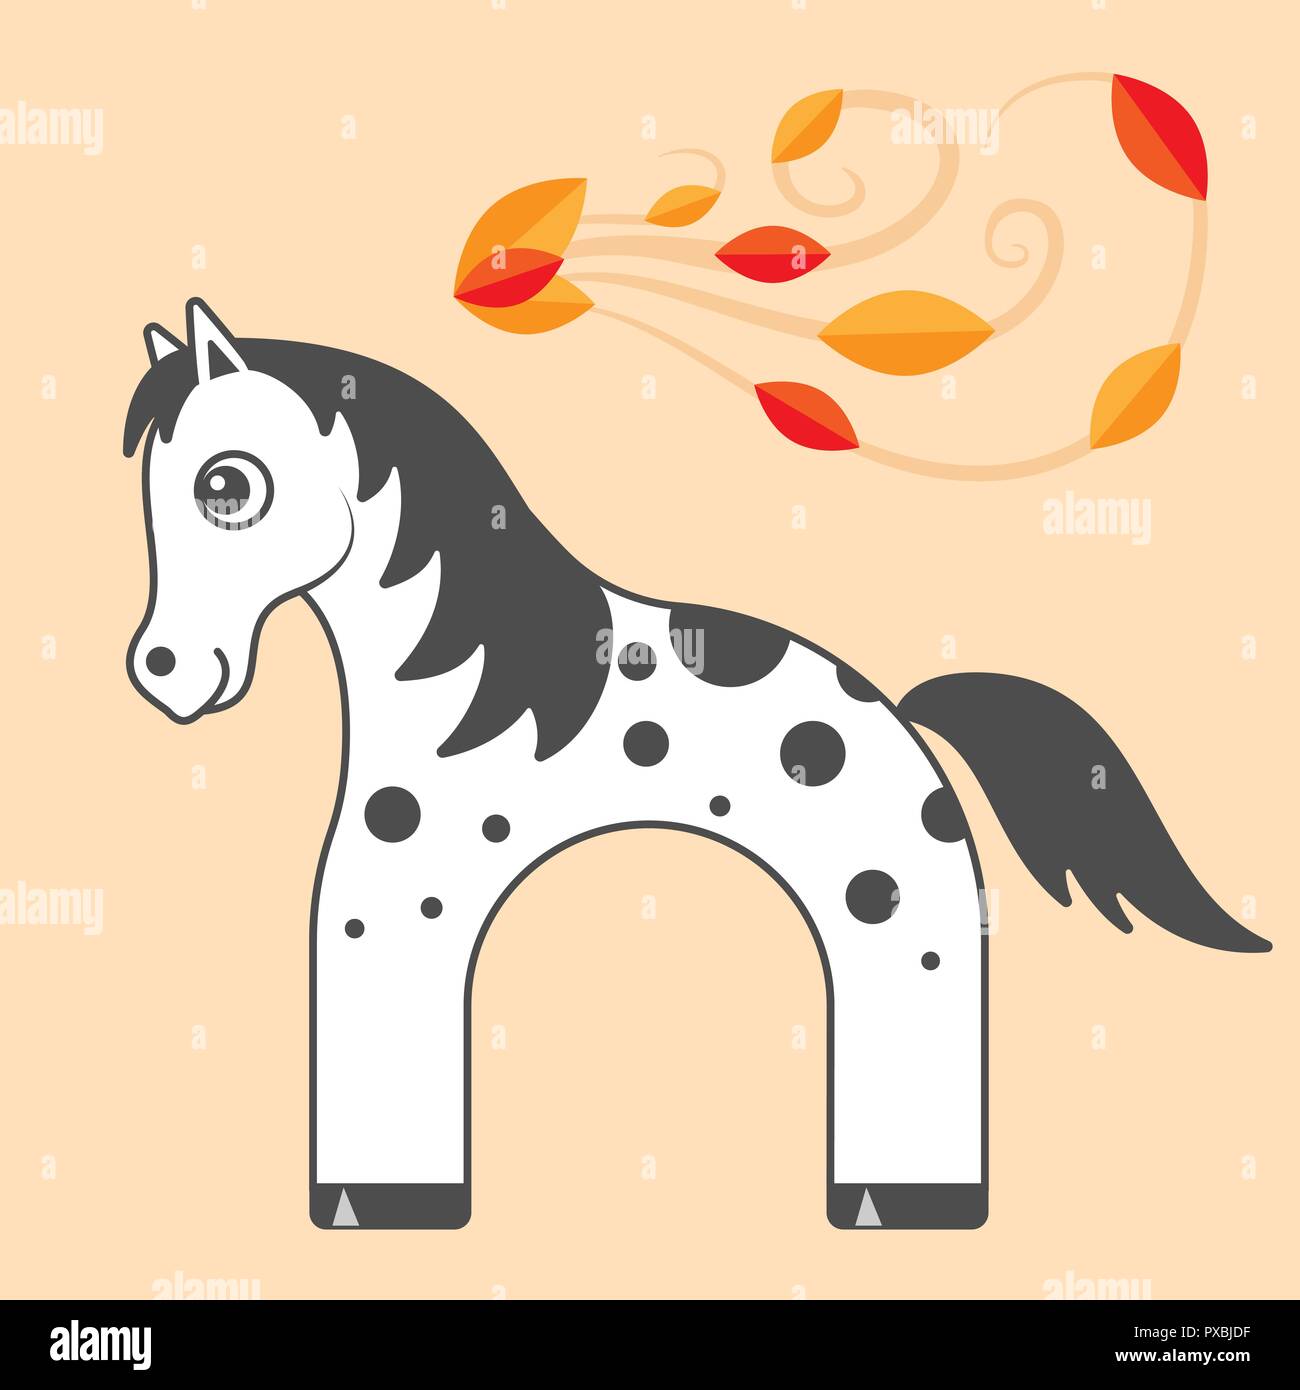 Cartoon horse for kids. Illustration for children. Flat design. Animal in minimalism style. Series of semicircular animals Stock Vector